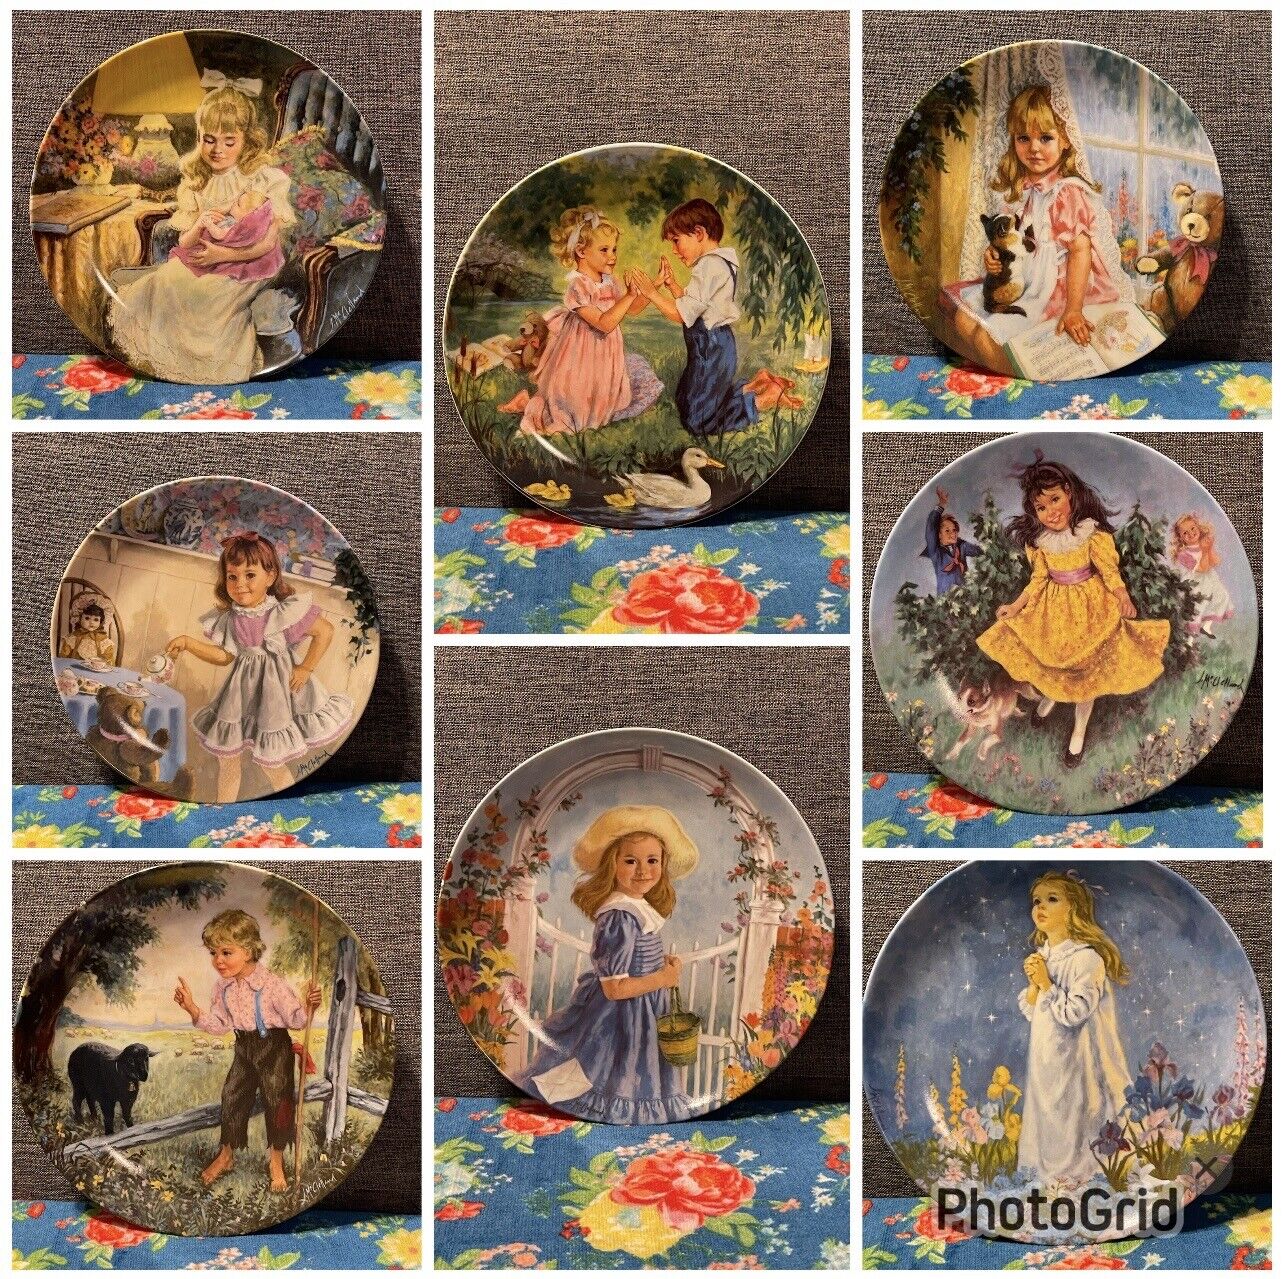 Vintage Reco The Treasured Songs of Childhood complete set of 8 Plates